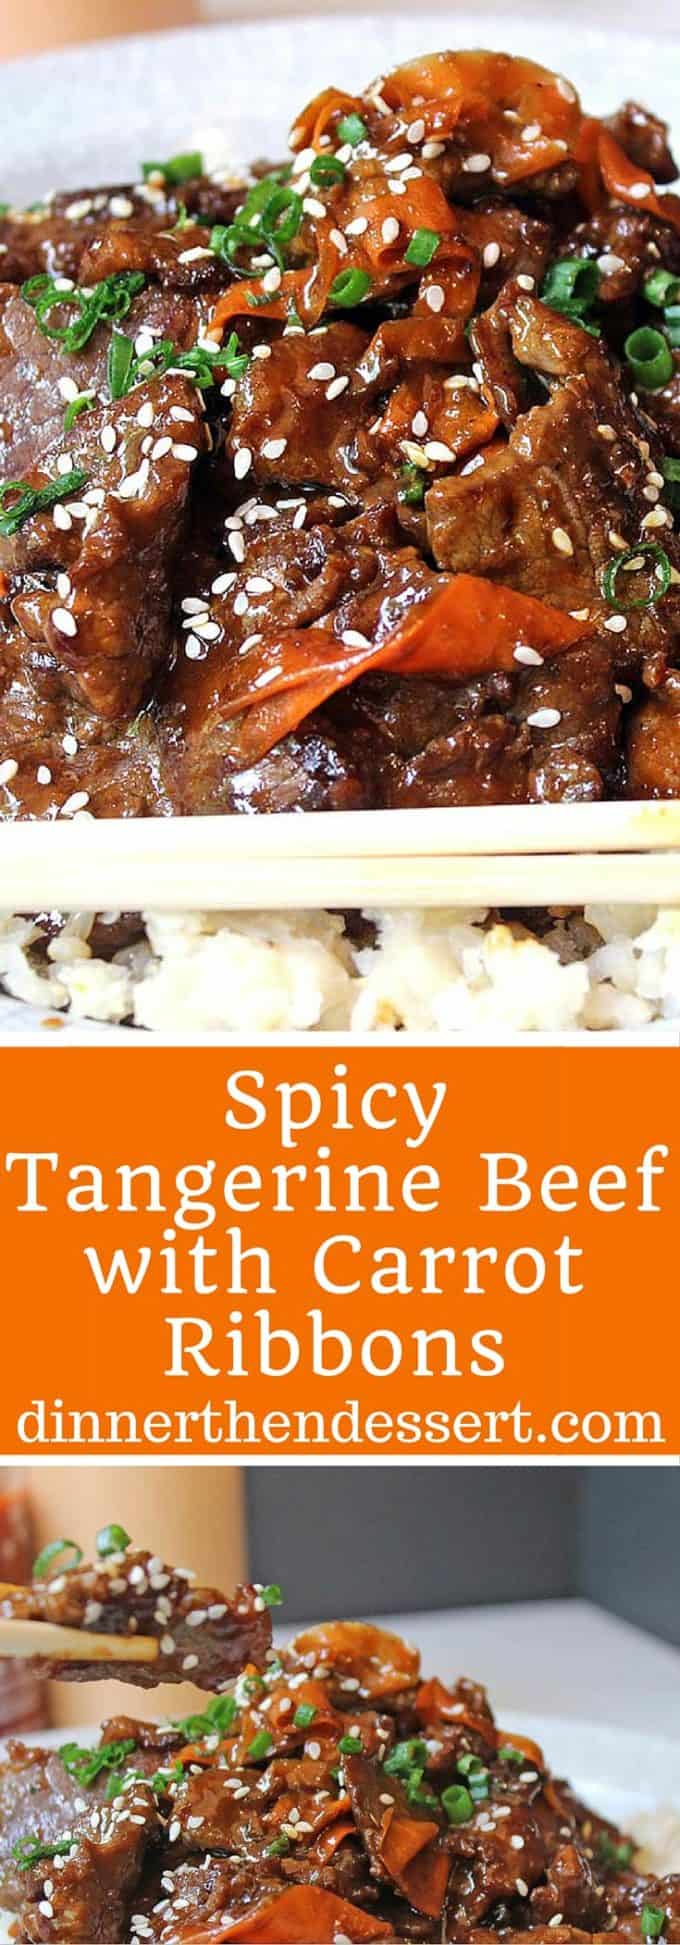 Tender beef simmered in spicy garlic orange sauce with carrot ribbons. Tastes like a cross between orange beef and Mongolian beef!